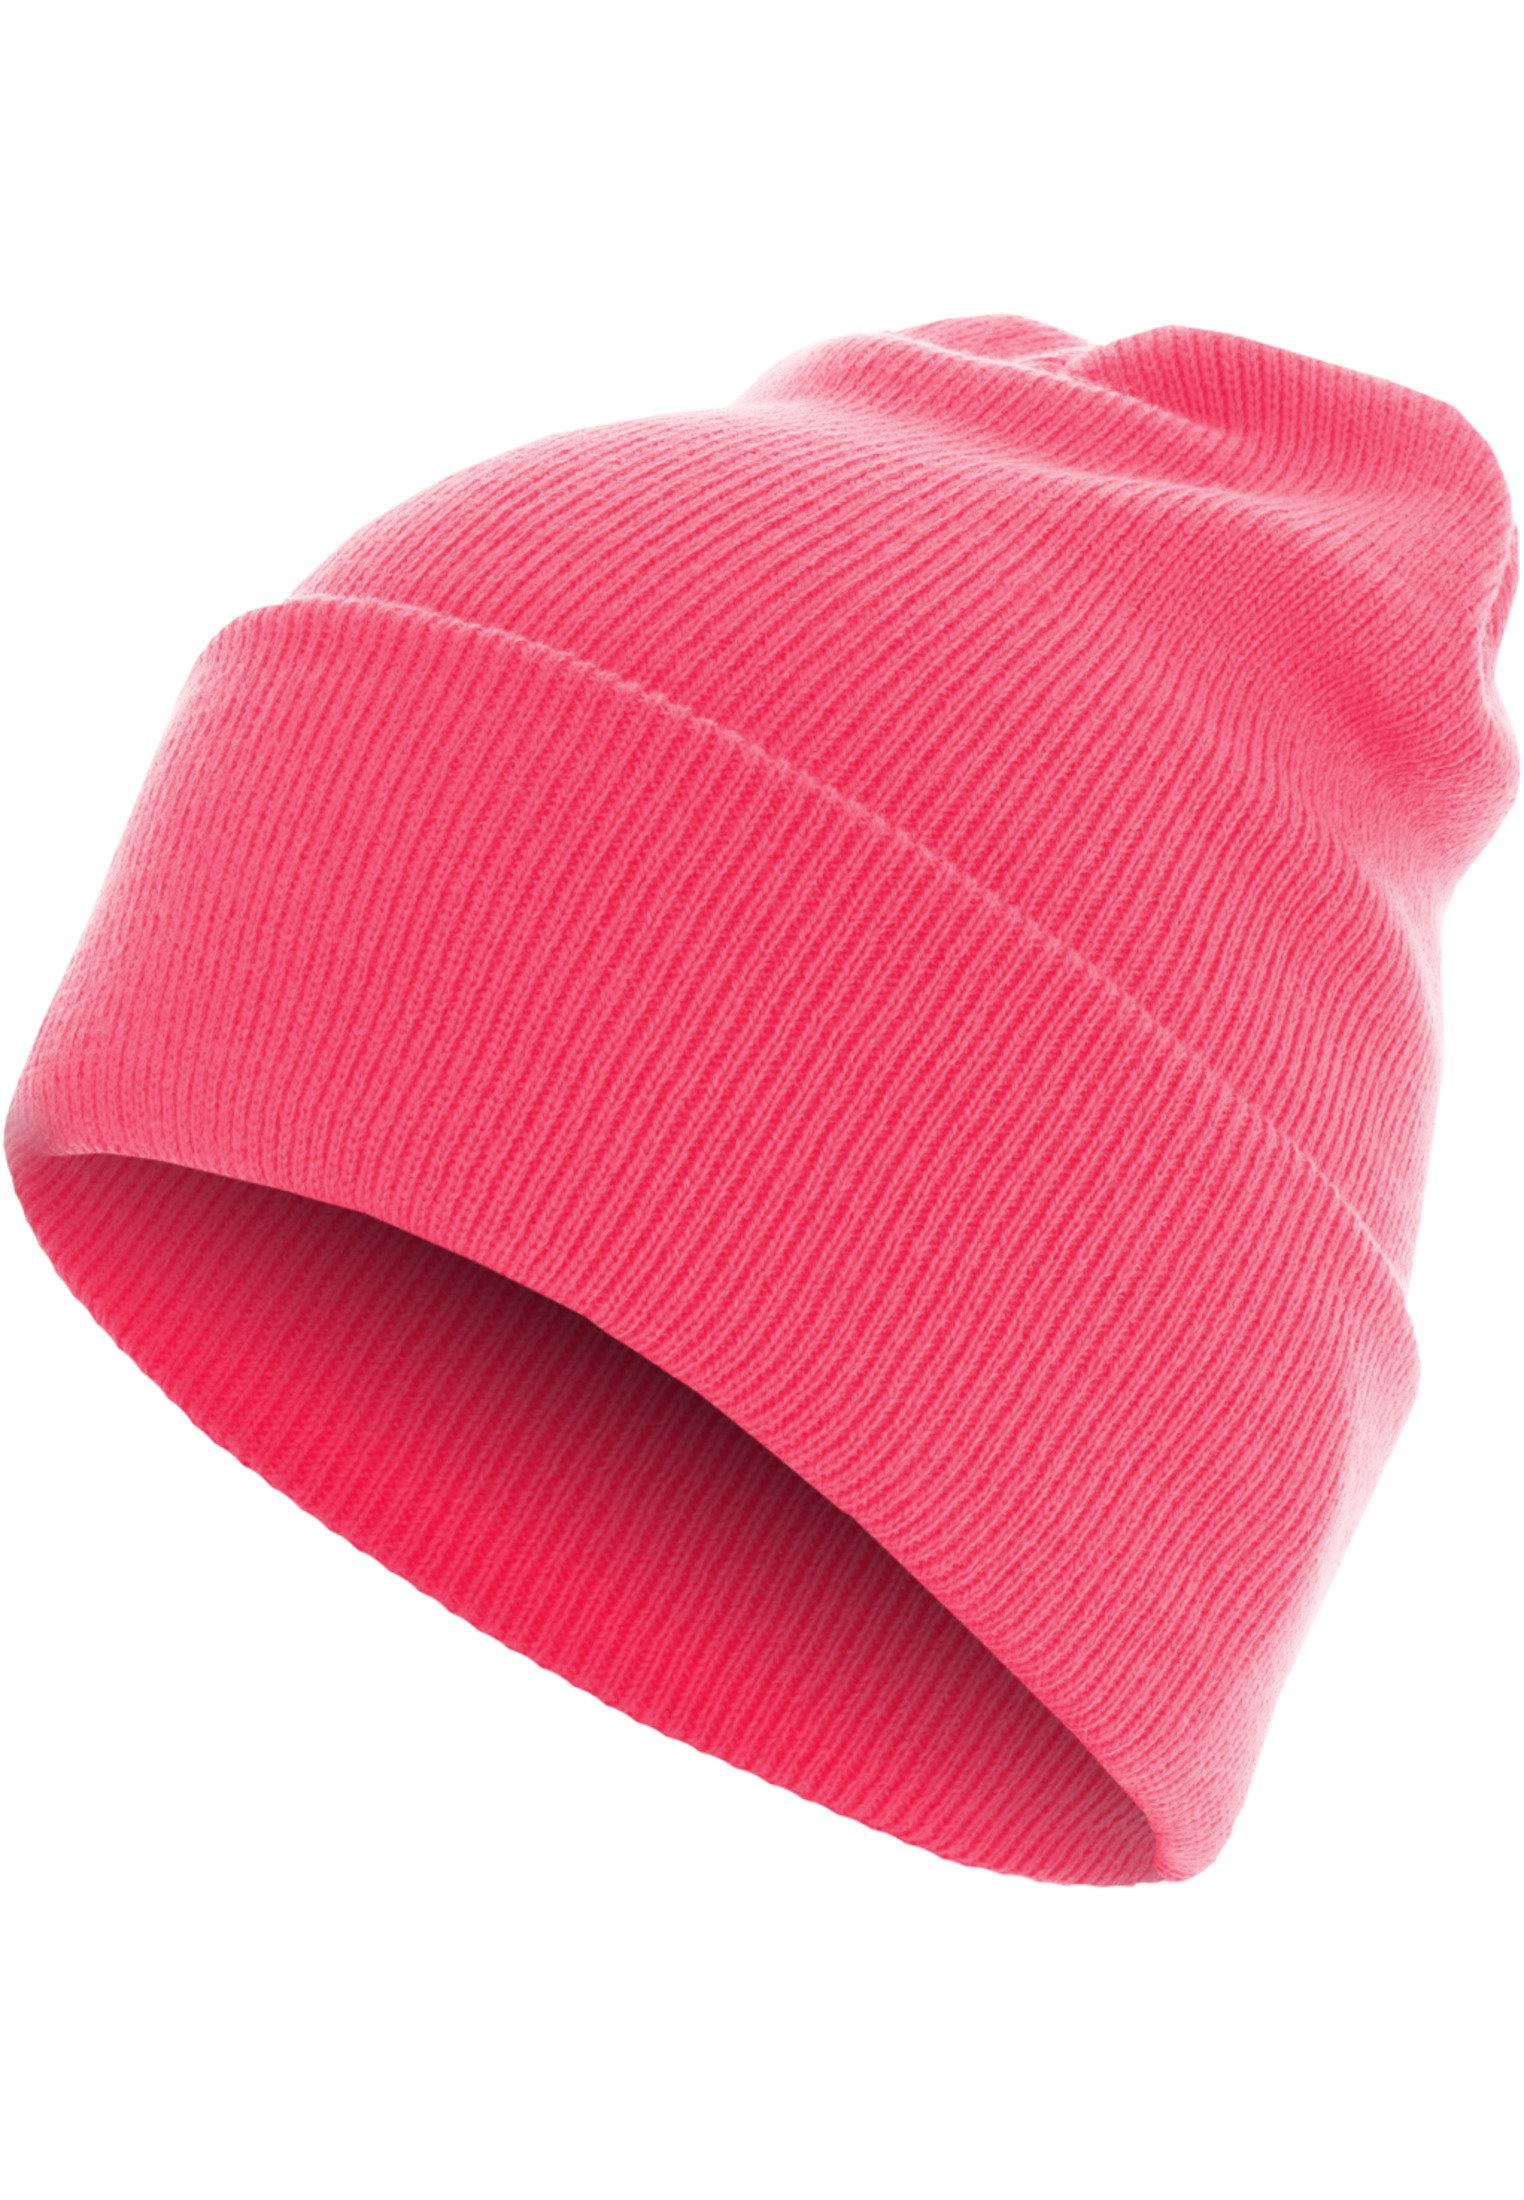 Beanie Basic Flap Long Version neonpink one size